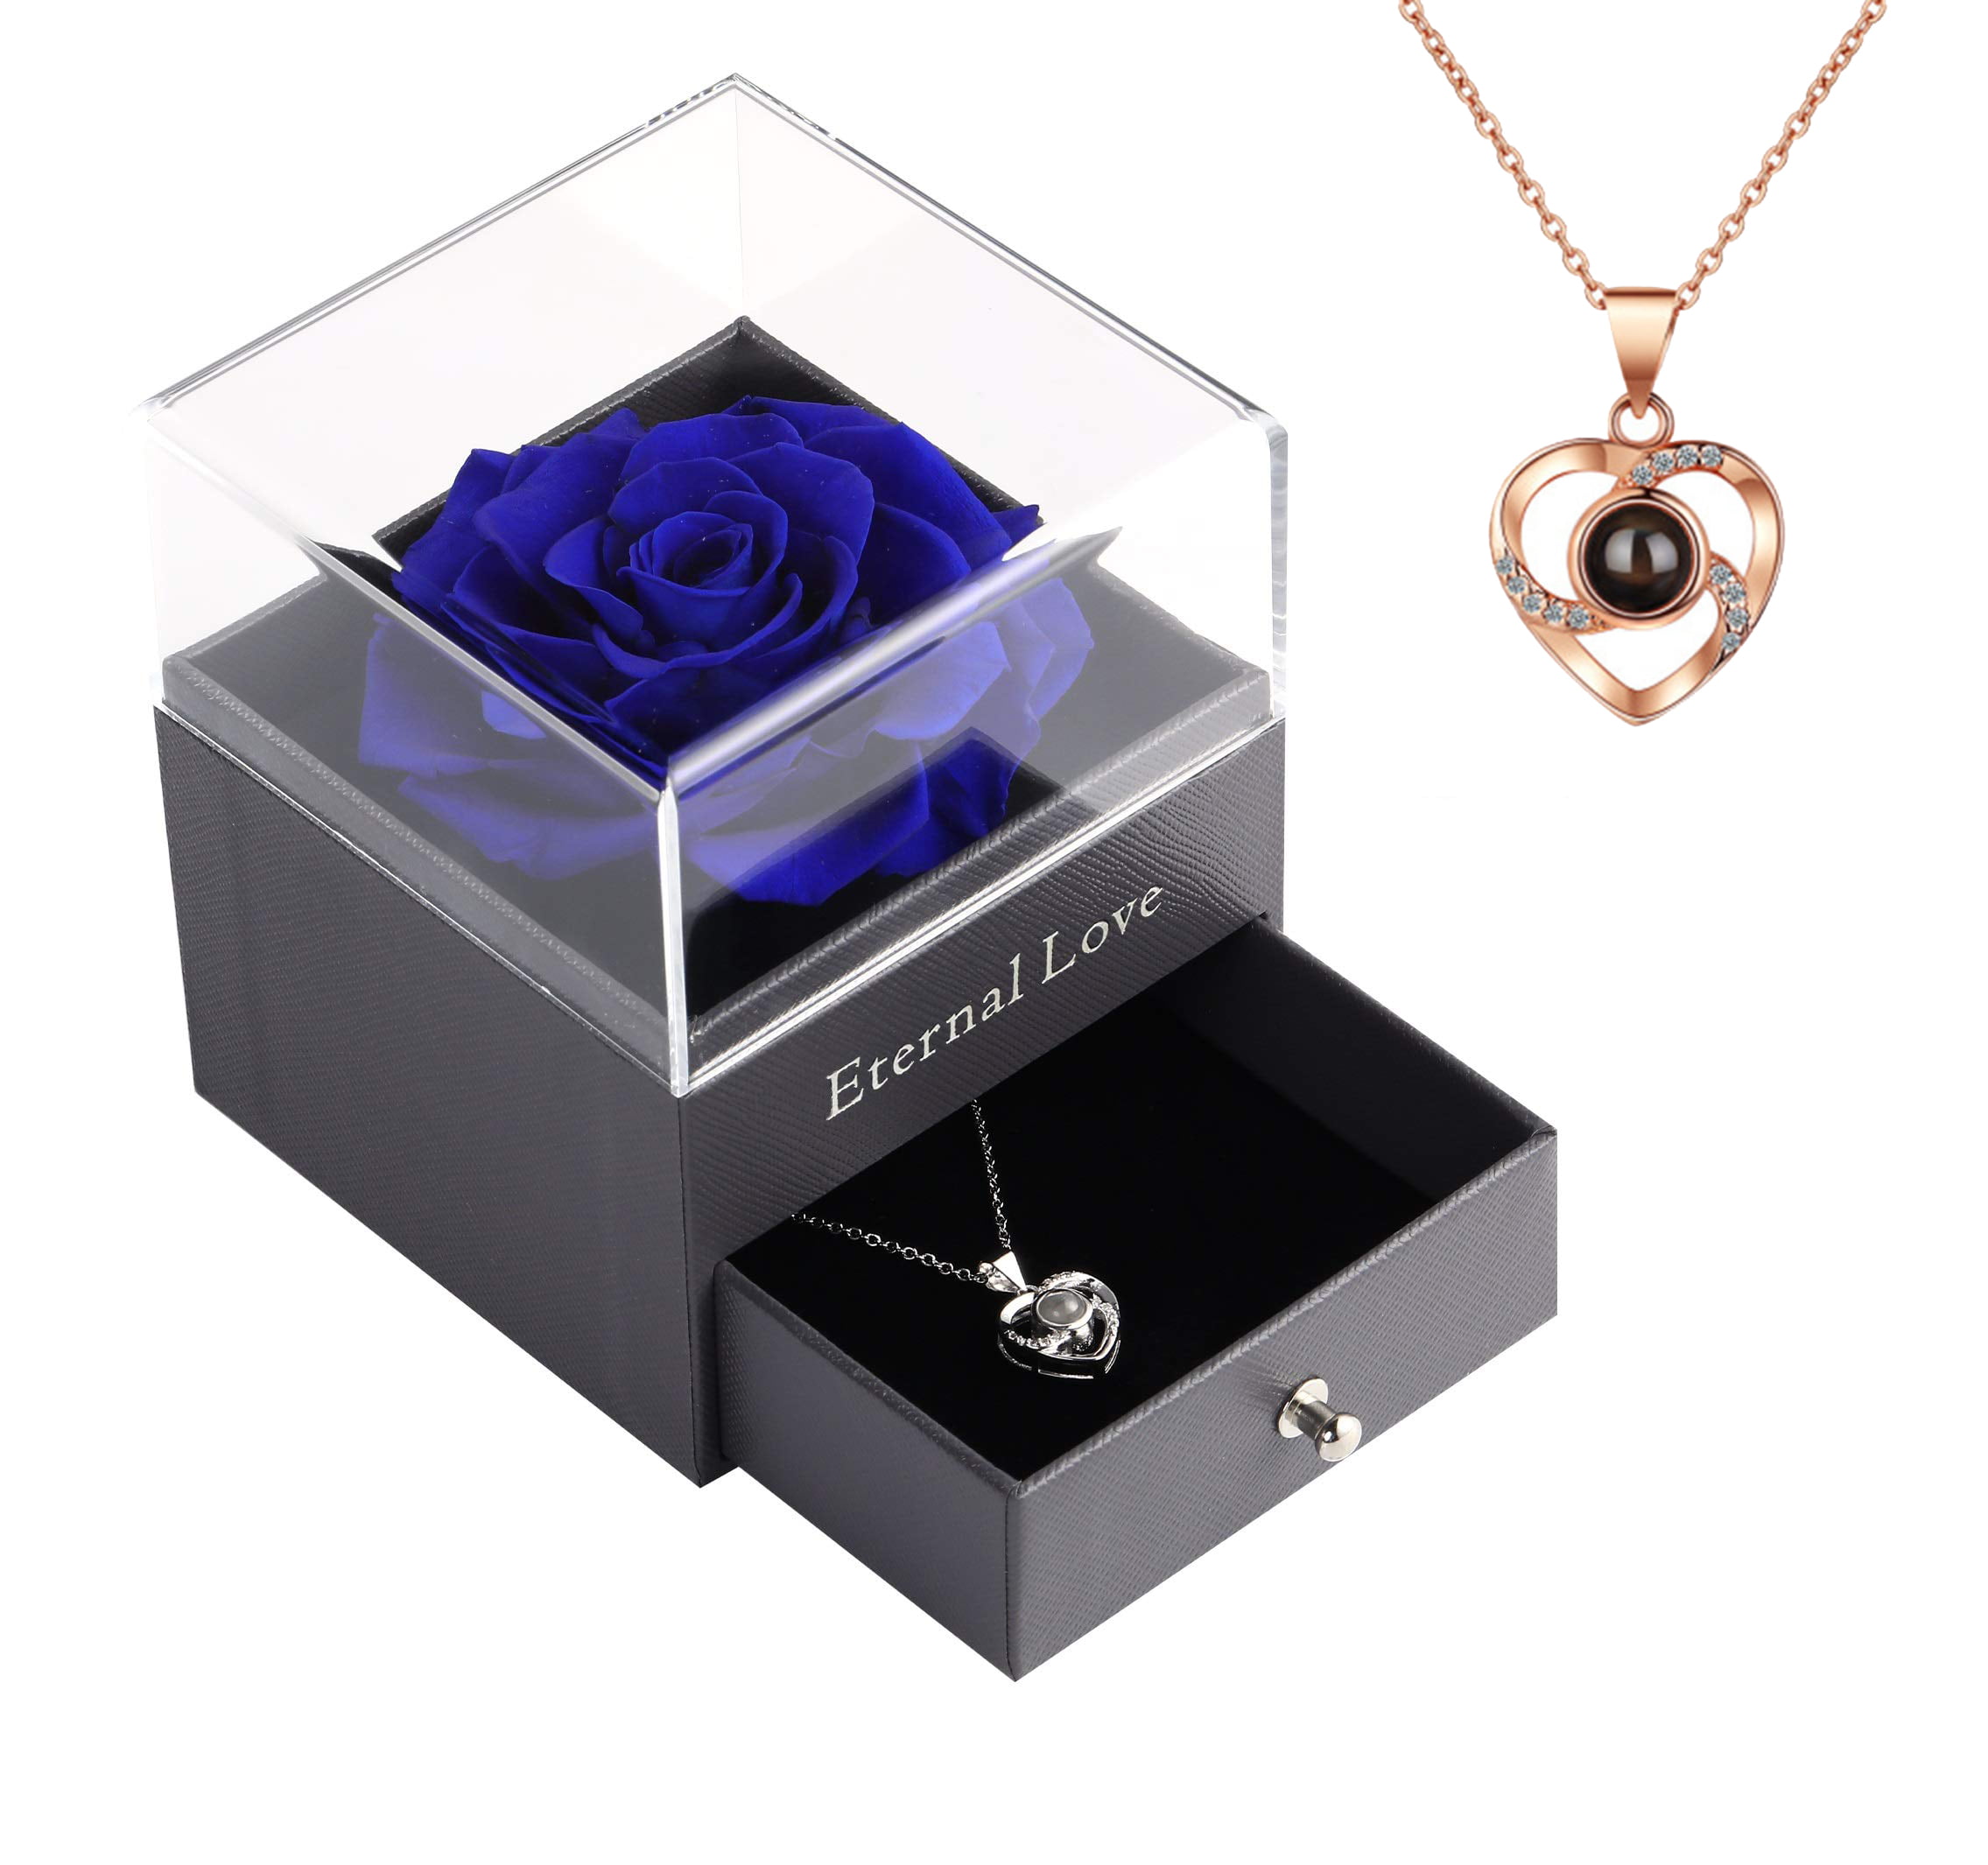 Romantic Gift Valentine's Gift Gold Plated Passion Rose Necklace Elegant Sterling Silver 925 Flower Rose